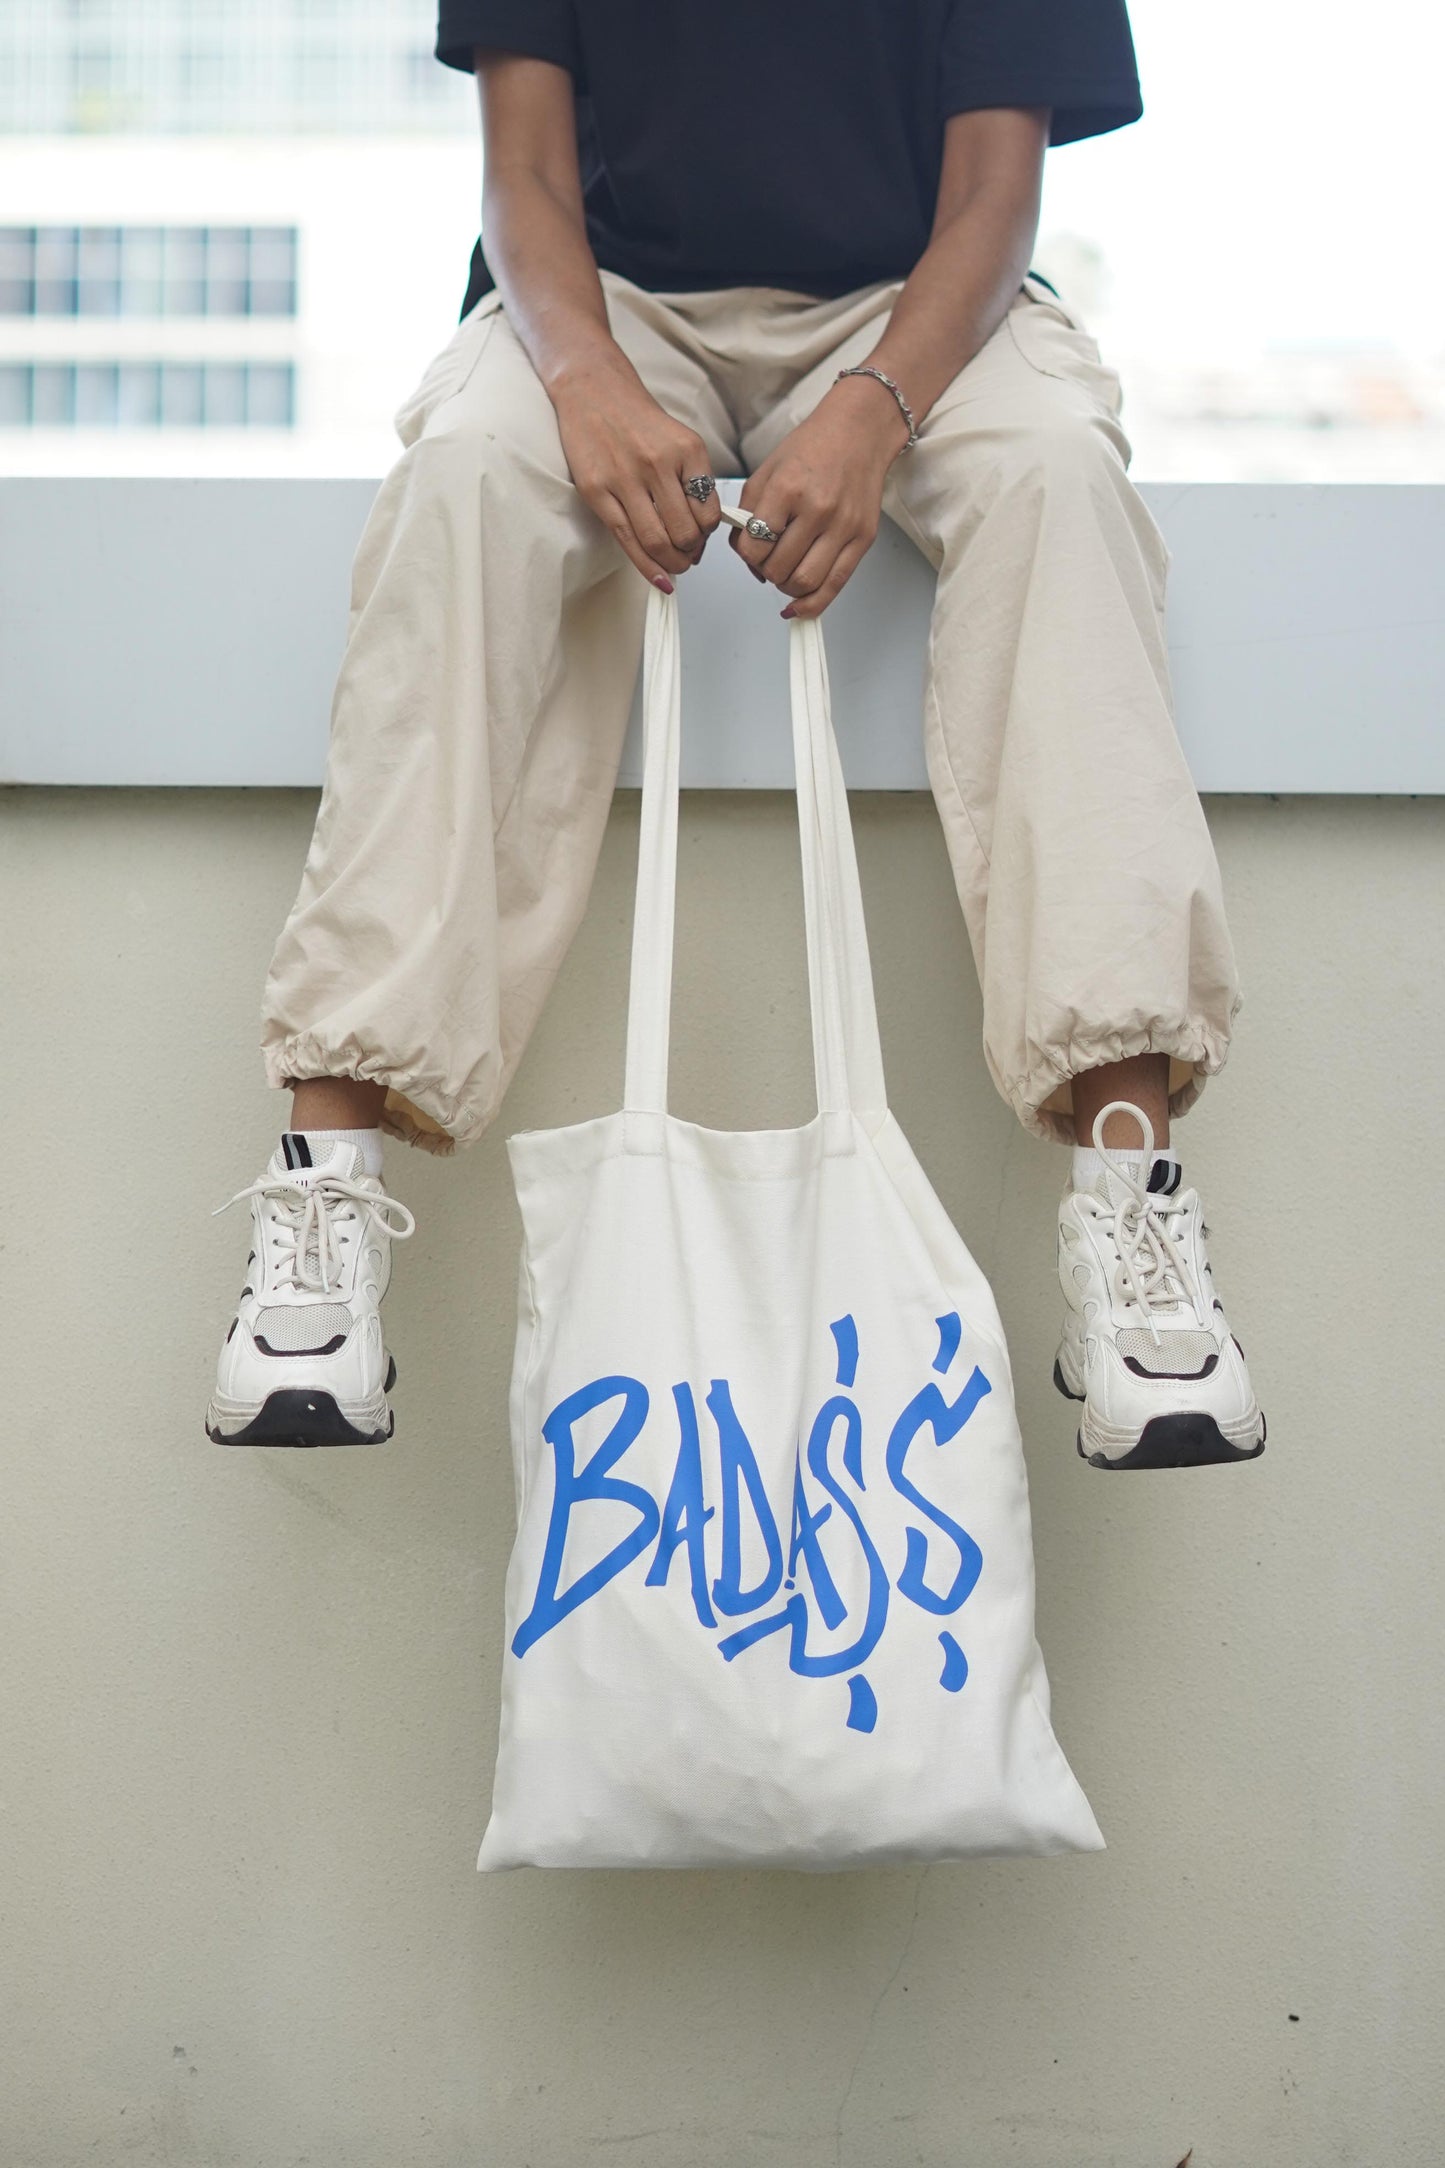 Badass Tote Bag- USE CODE "BANK15" TO GET  15% OFF